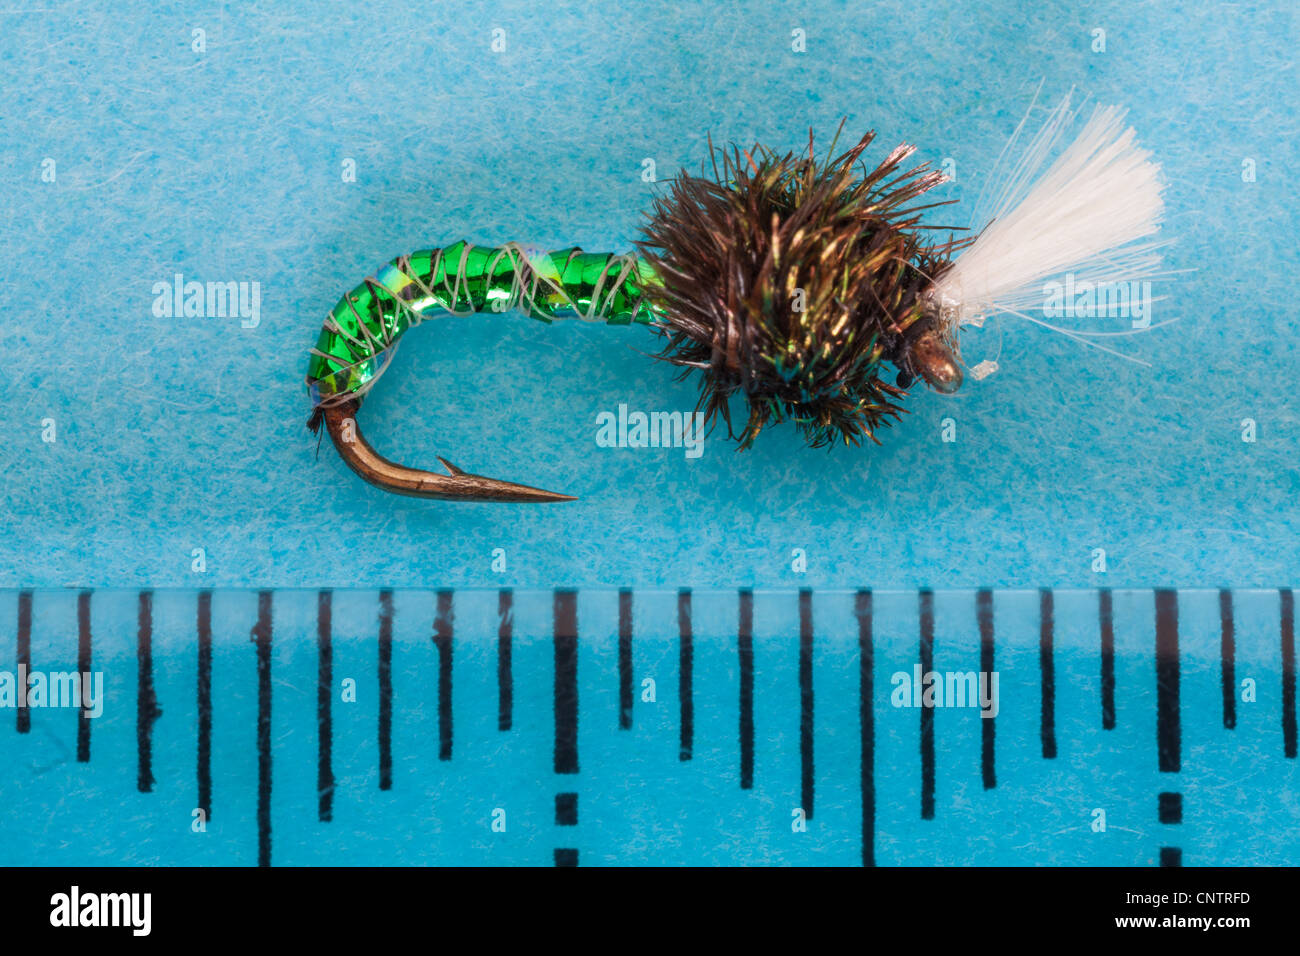 suspender buzzer trout fly Stock Photo